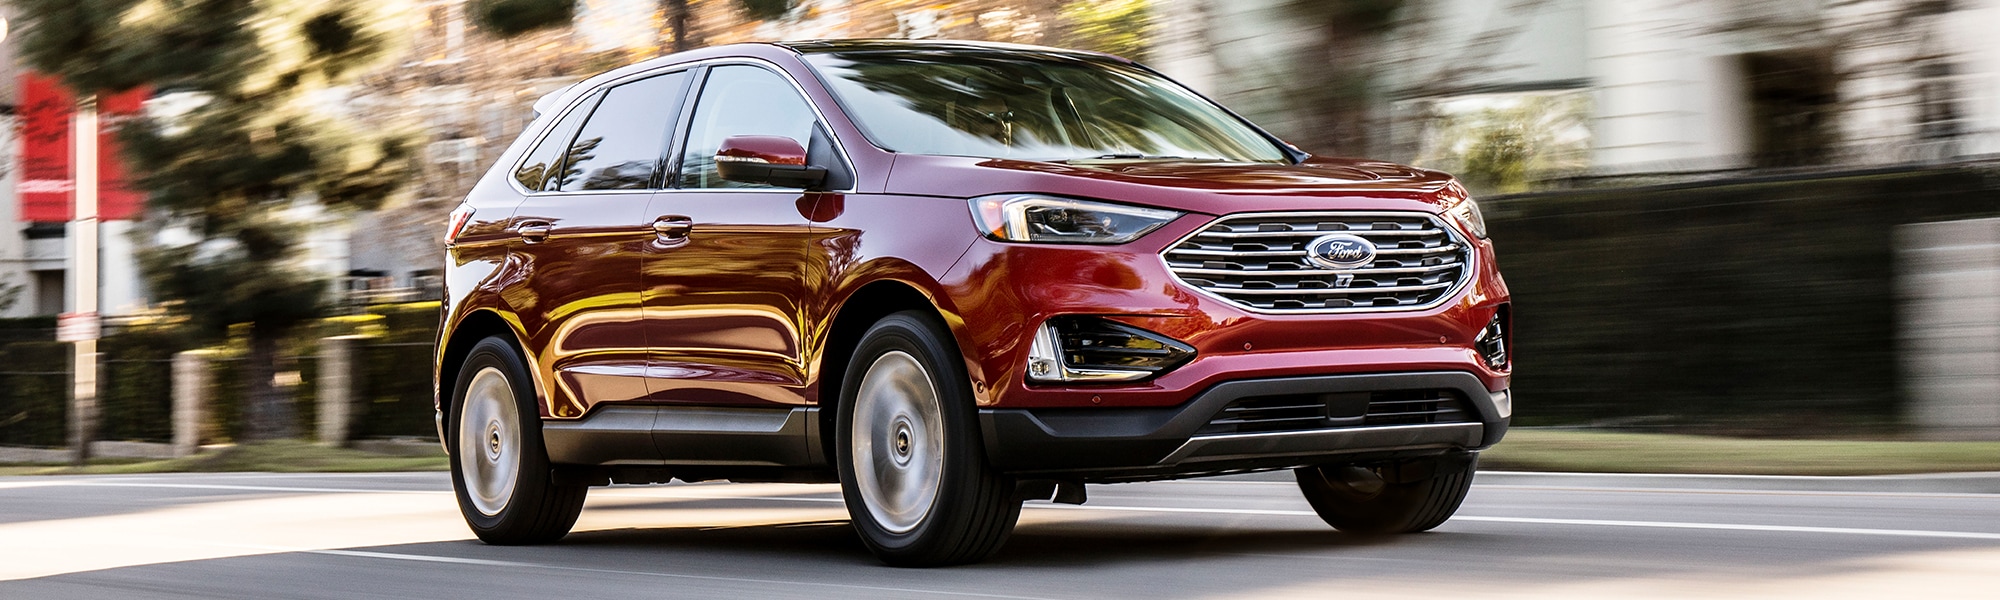 2020 Ford Edge | Configurations & More | Mike Castrucci Ford Milford